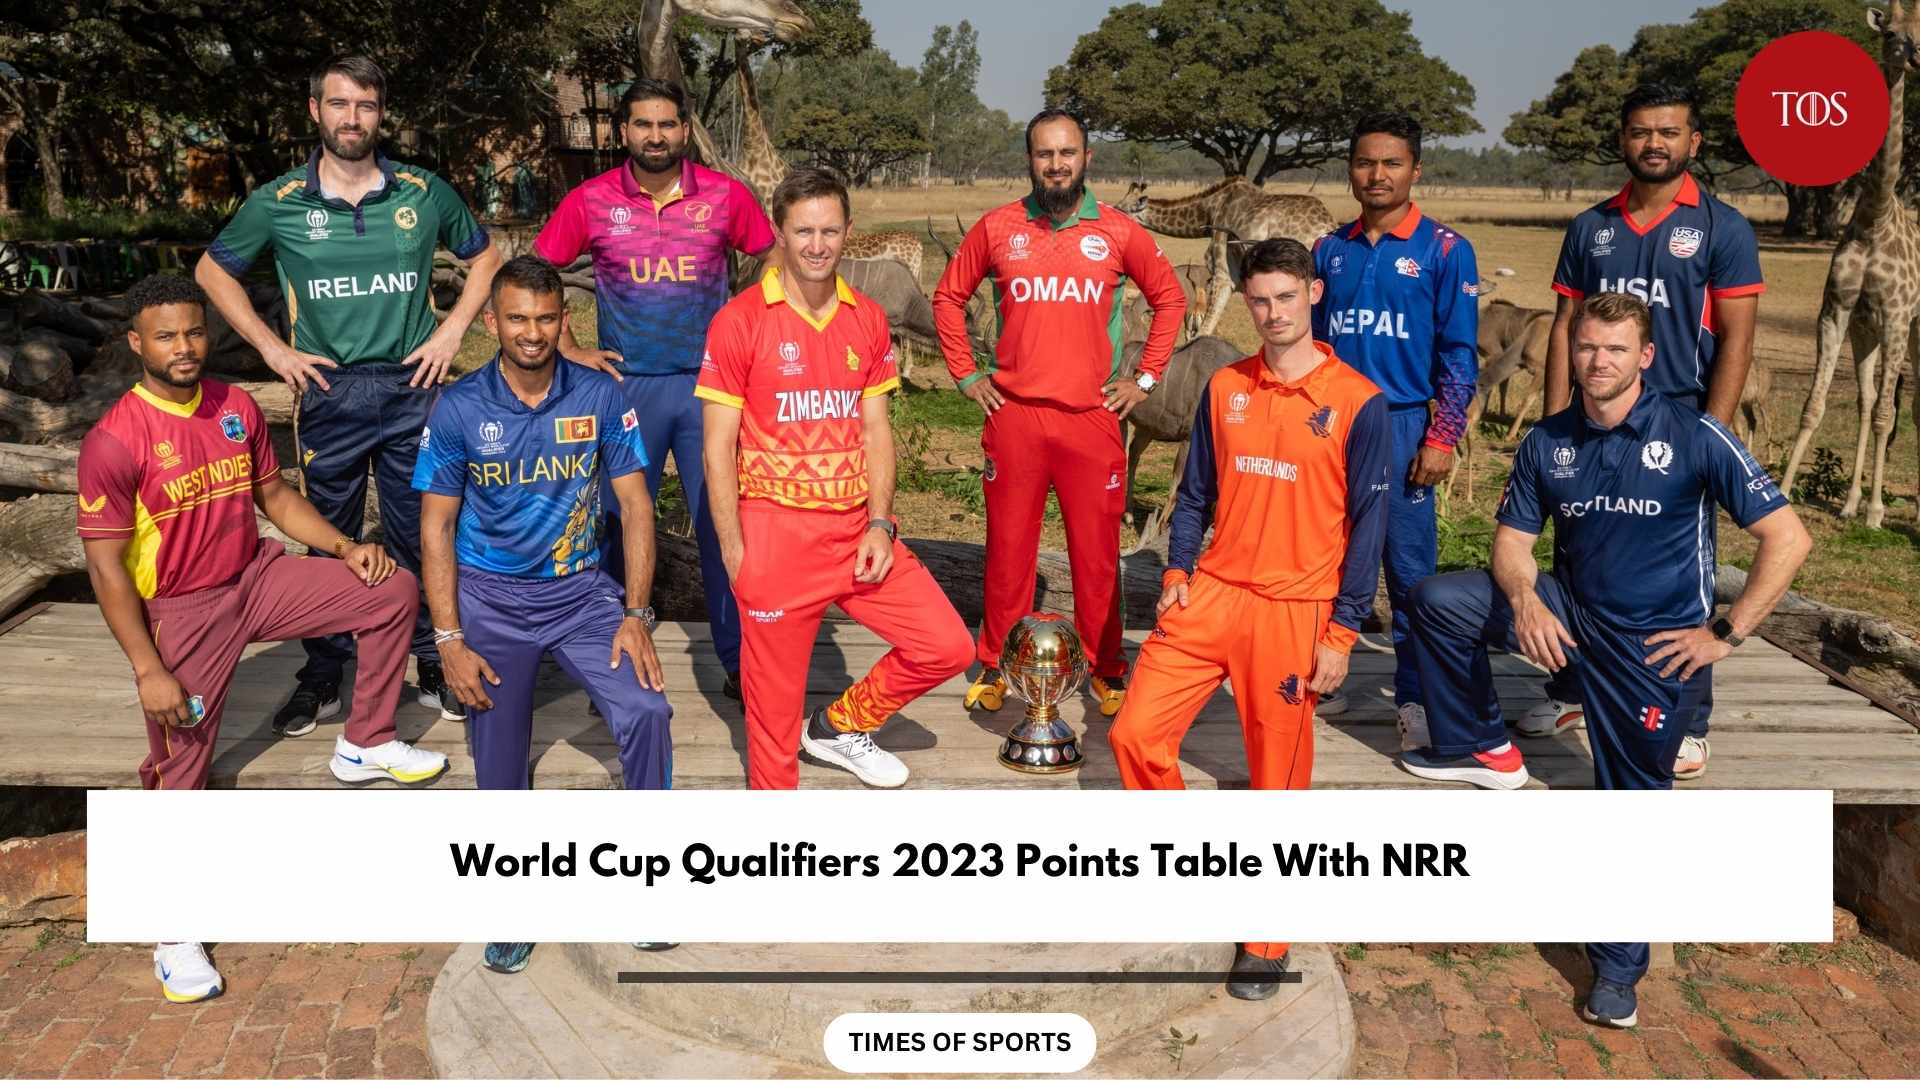 ODI World Cup Qualifiers 2023 Points Table With NRR